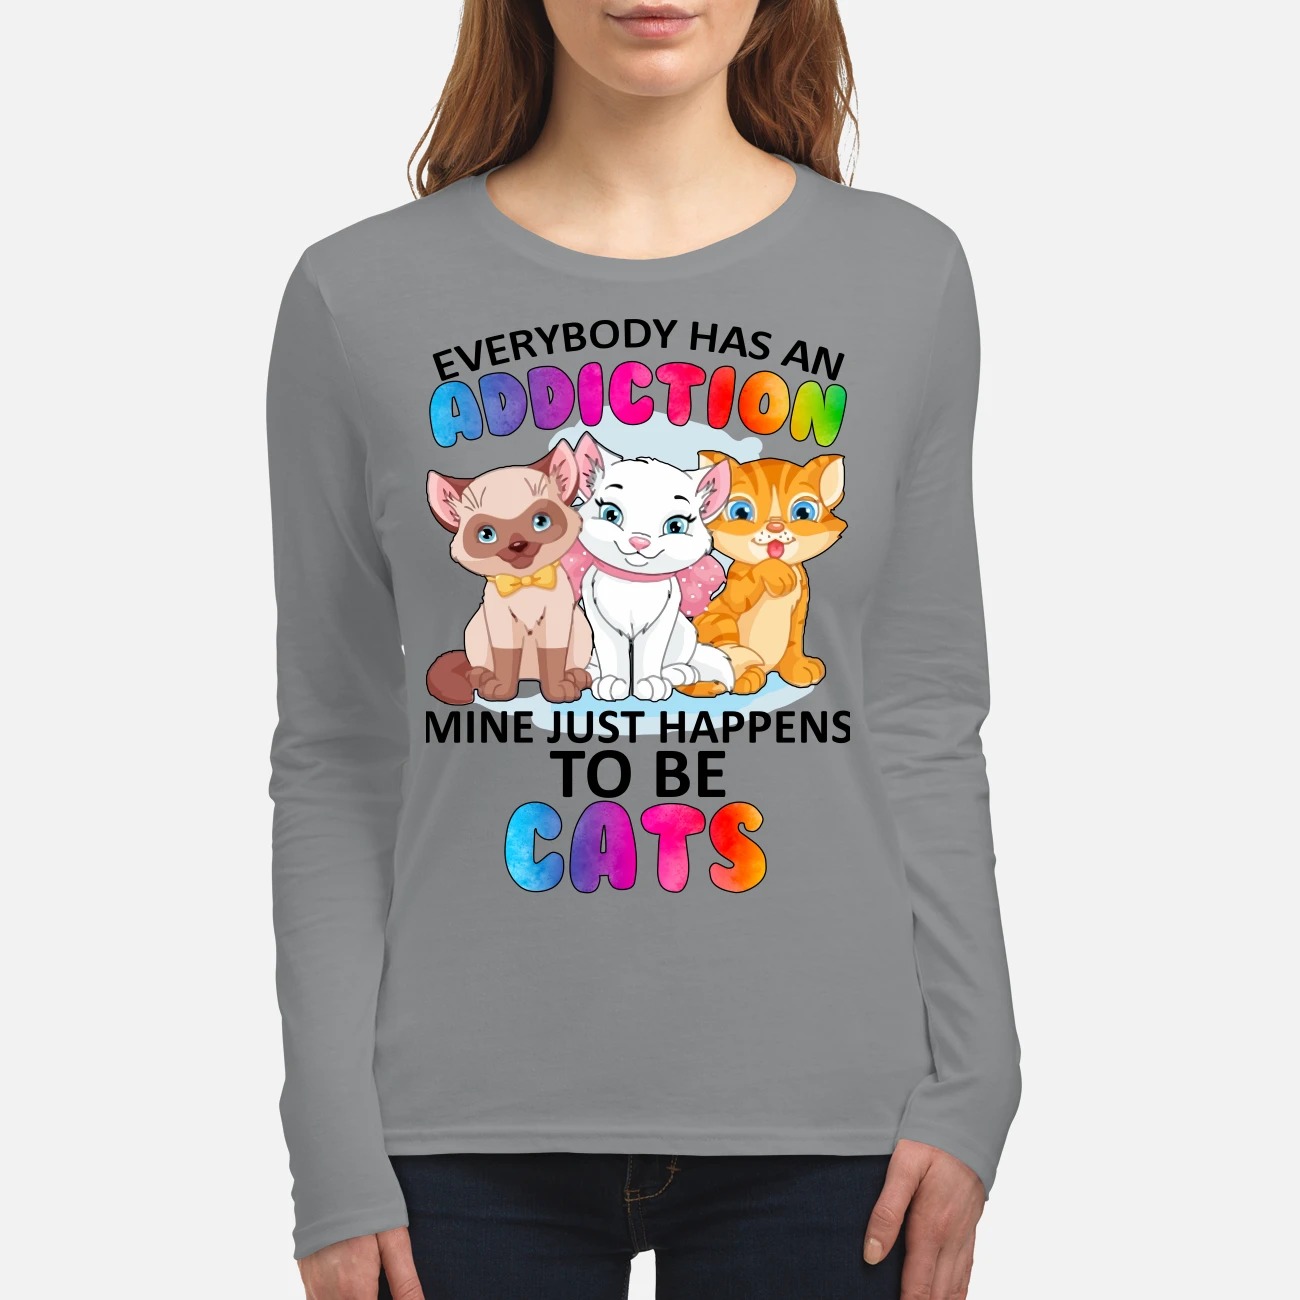 Everybody has an addiction mine just happens to be cats women's long sleeved shirt